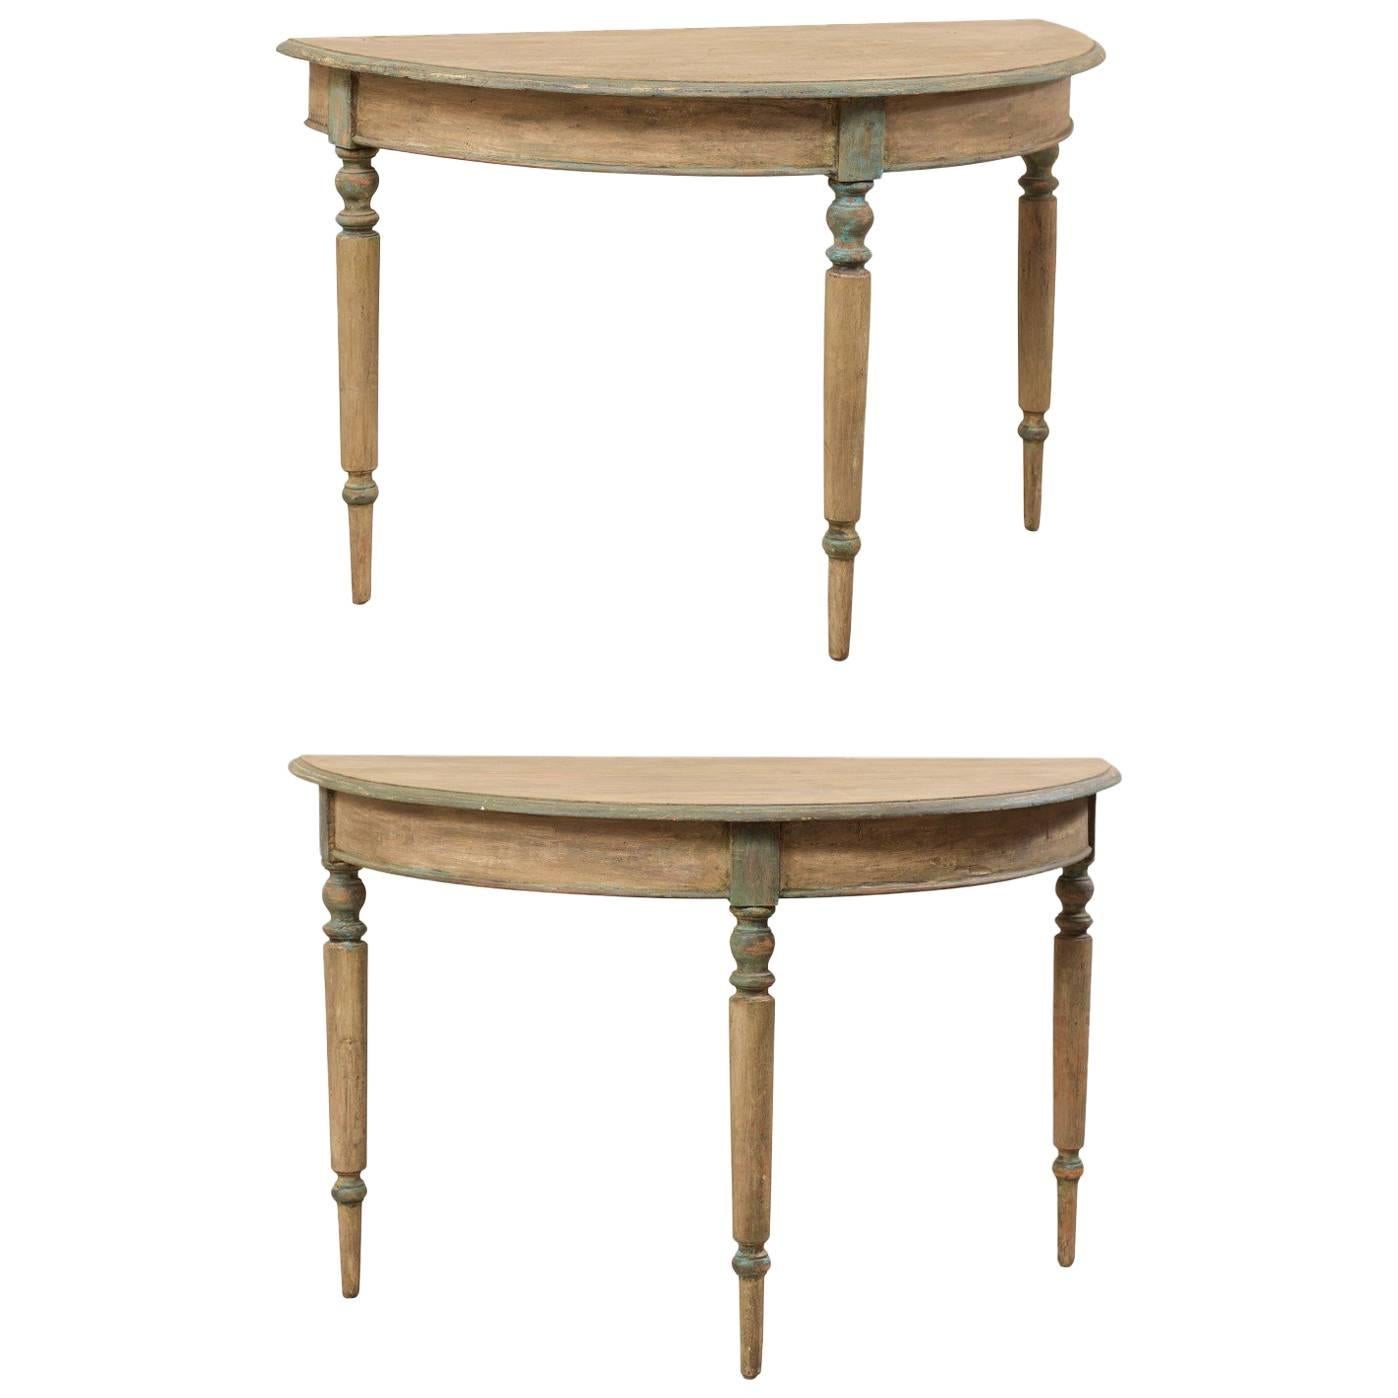 Pair of 19th Century Swedish Painted Wood Demi-Lune Tables with Turned Legs